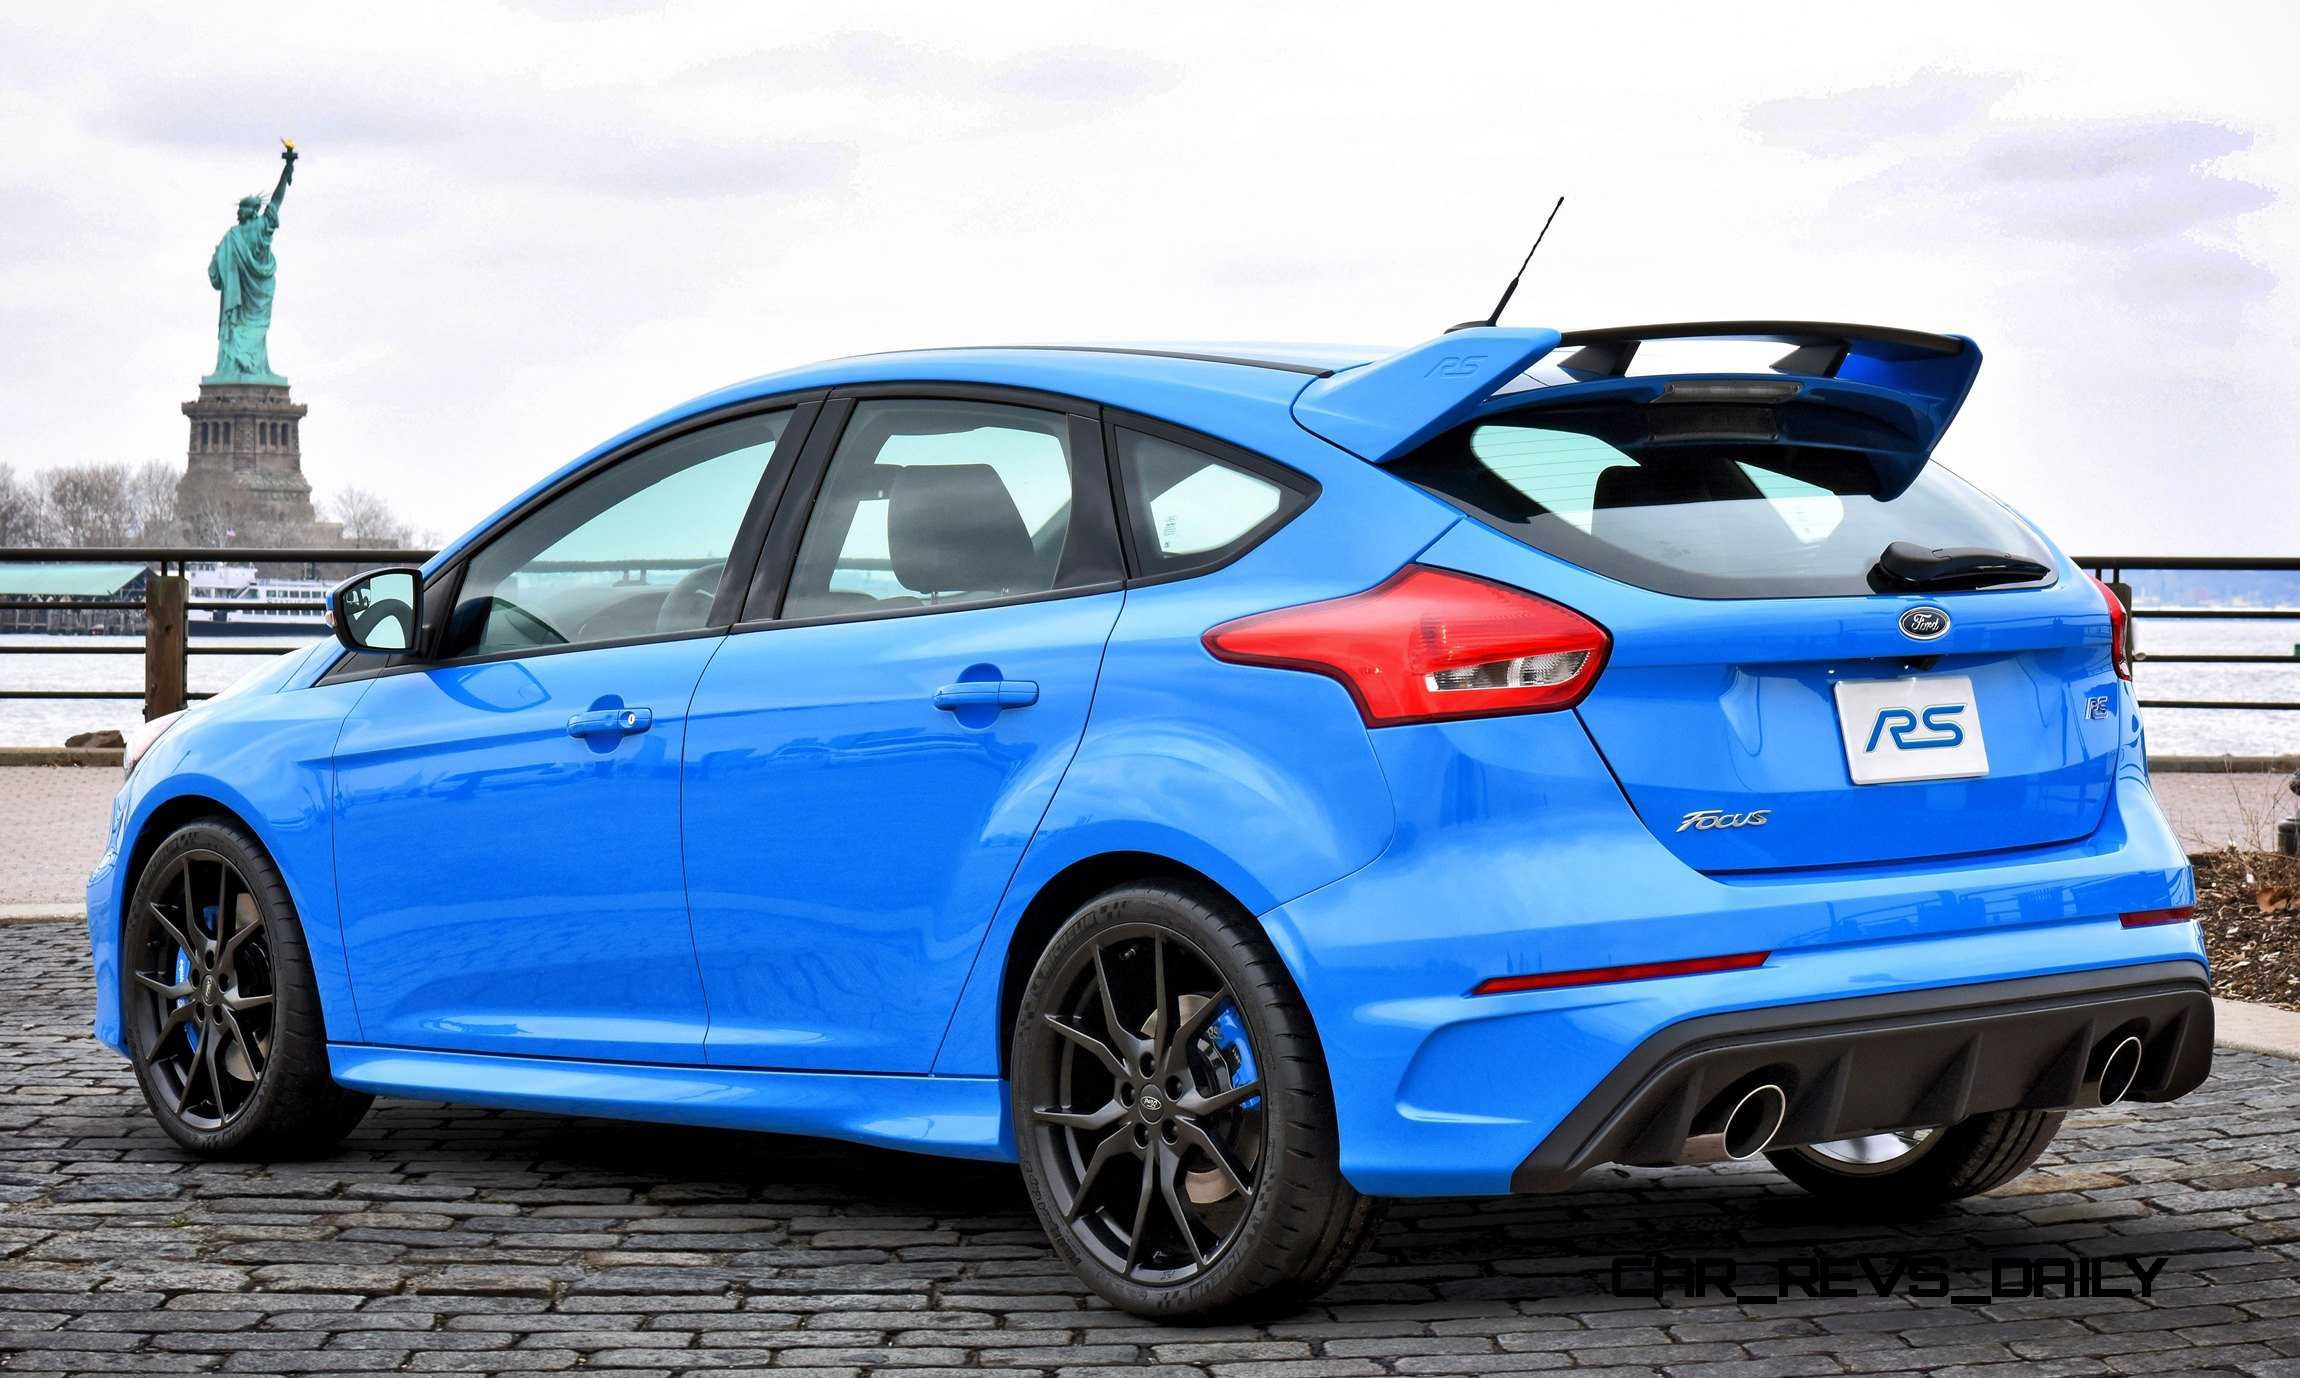 2016 Ford Focus RS Escapes Auto Show Cage to See NYC Sights | Ford focus rs,  Ford focus, Focus rs